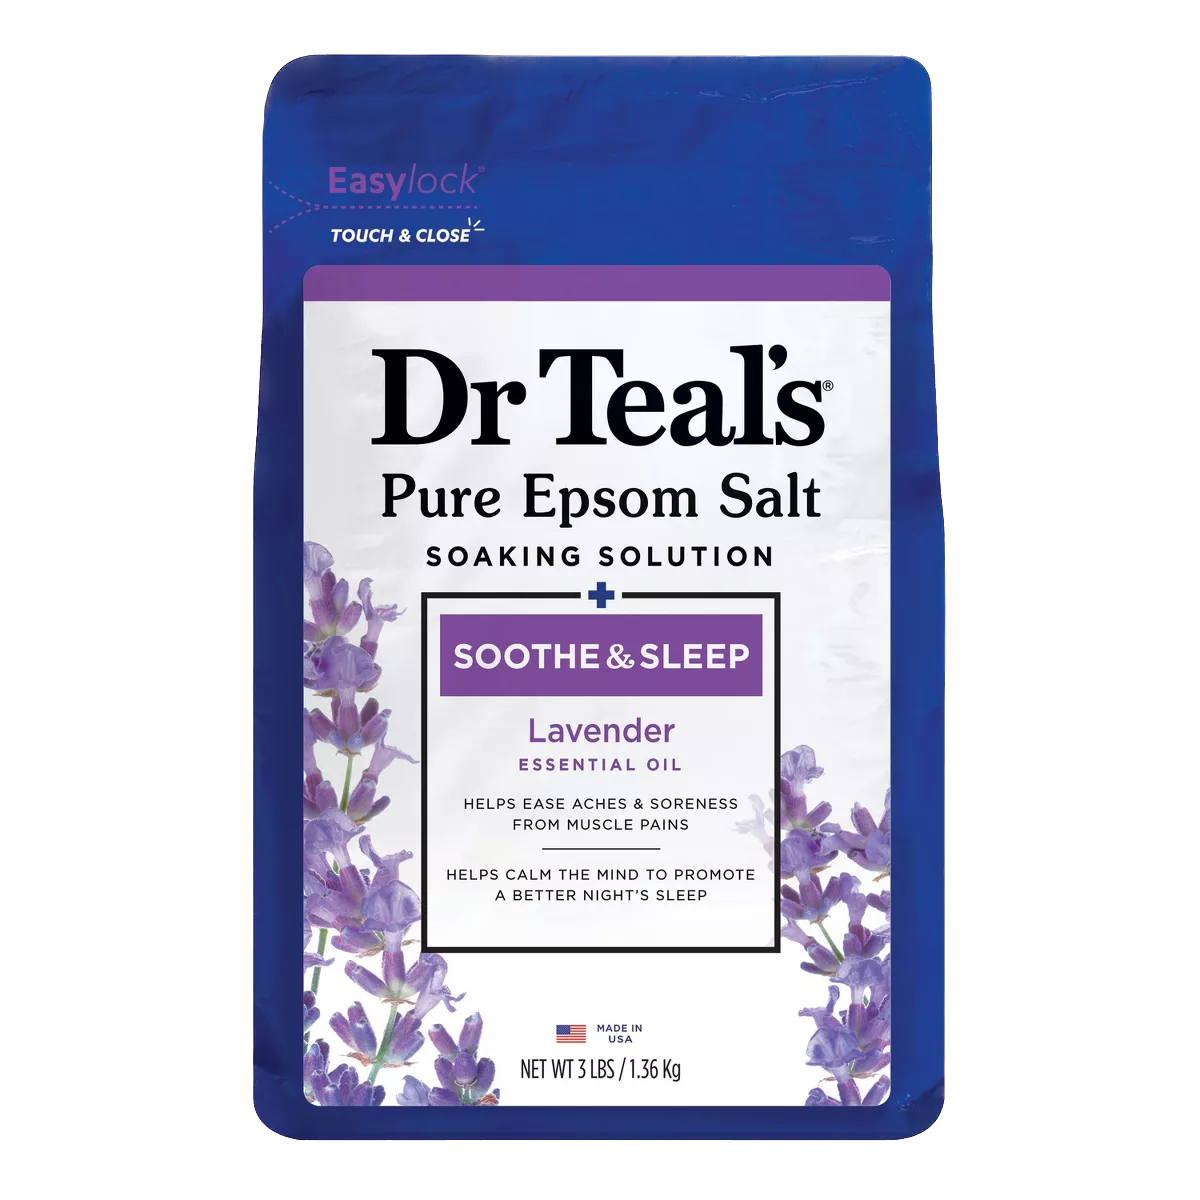 Dr. Teal’s Soothe & Sleep with Lavender Pure Epsom Salt Soaking Solution